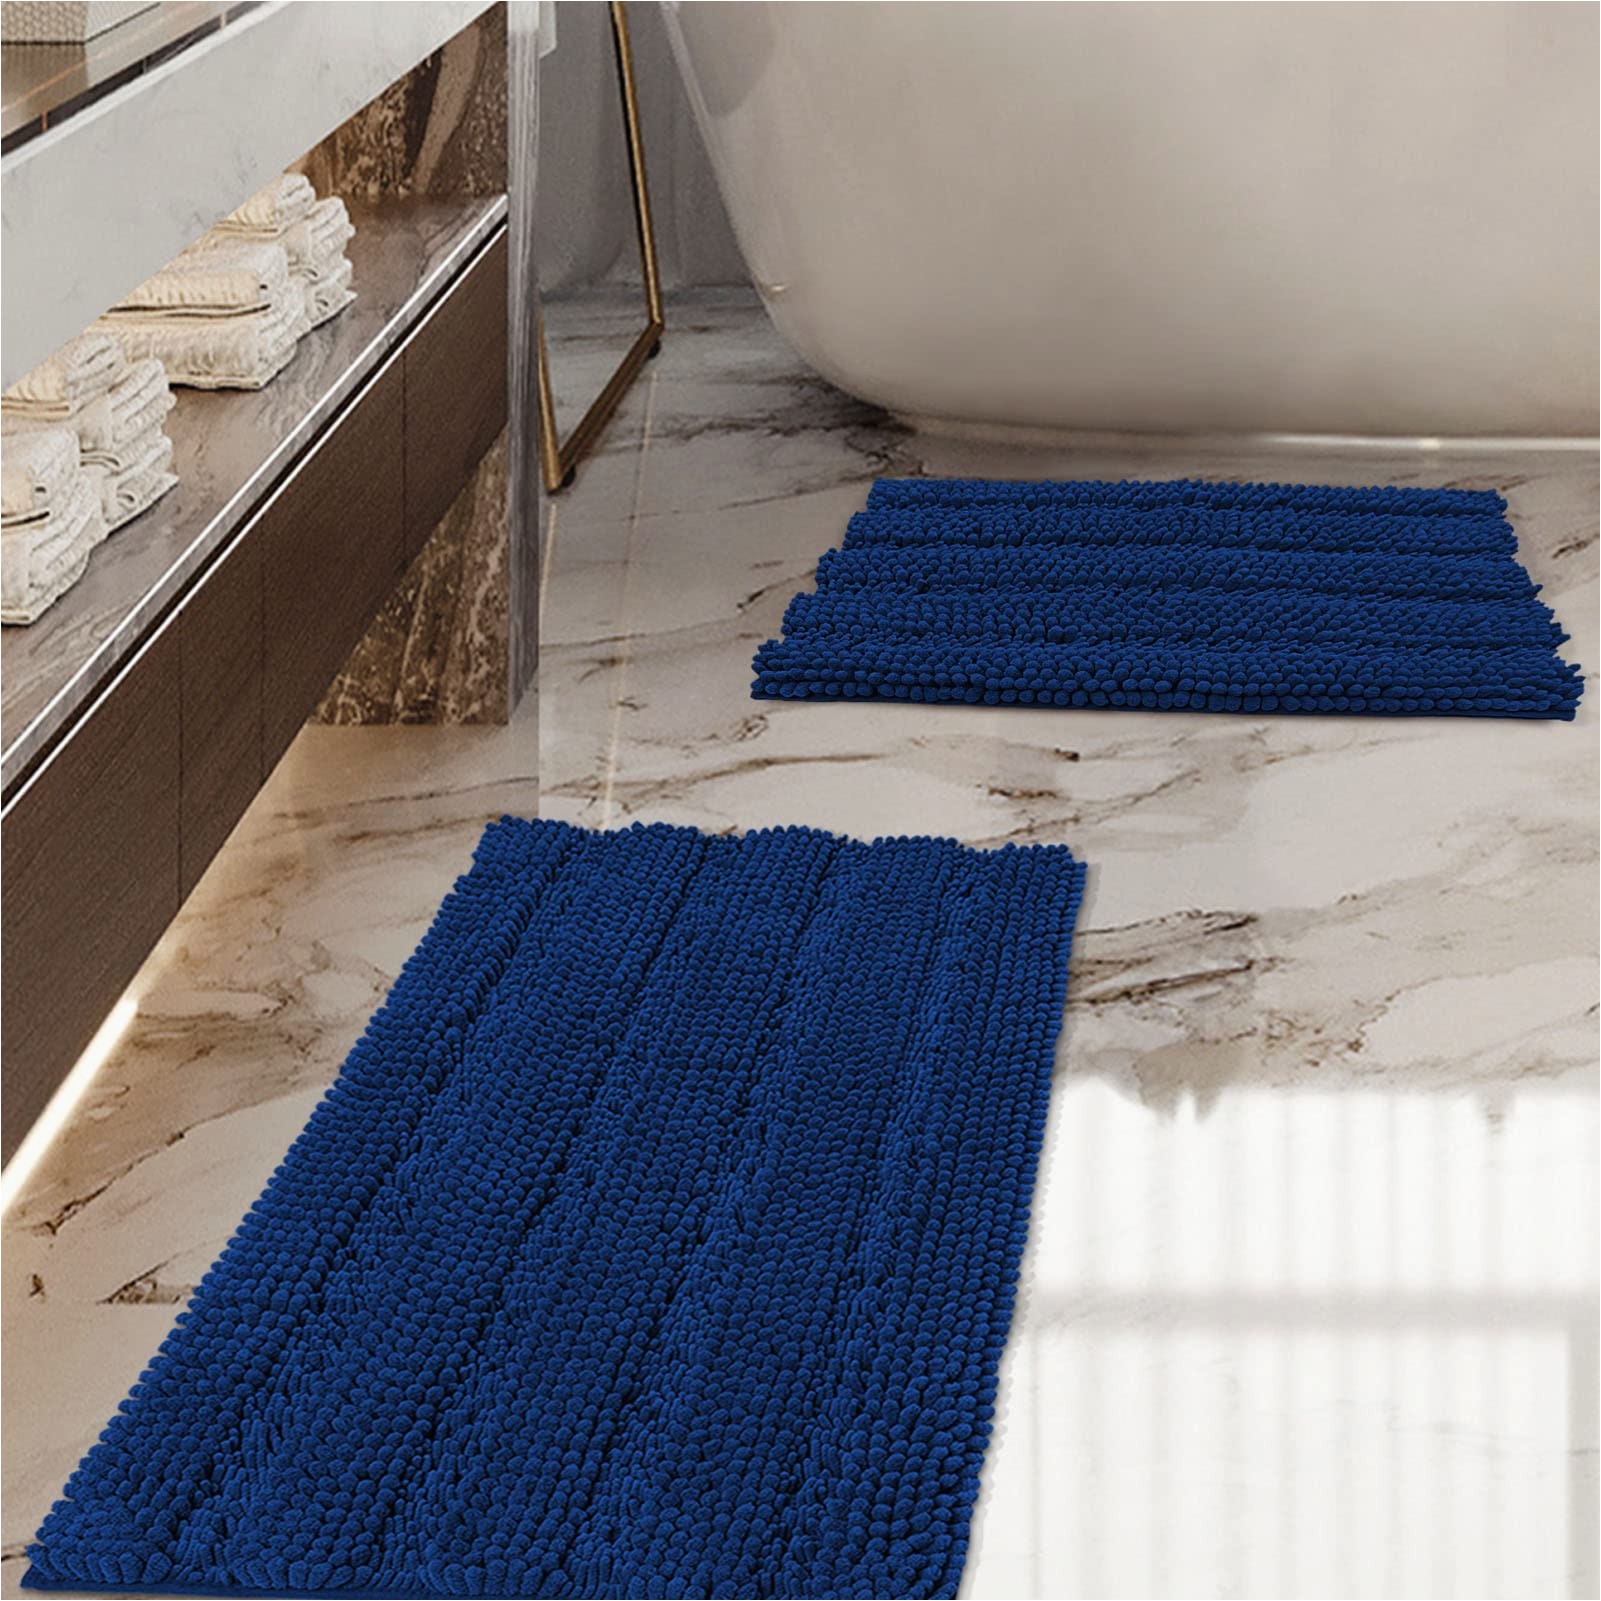 Striped Bath Rug Sets Icover Bathroom Rugs Set, Anti-slip Design Thick Chenille Striped Bath Mats, Strong Absorbent Floor Mats Machine Washable Also for Kitchen, Living …